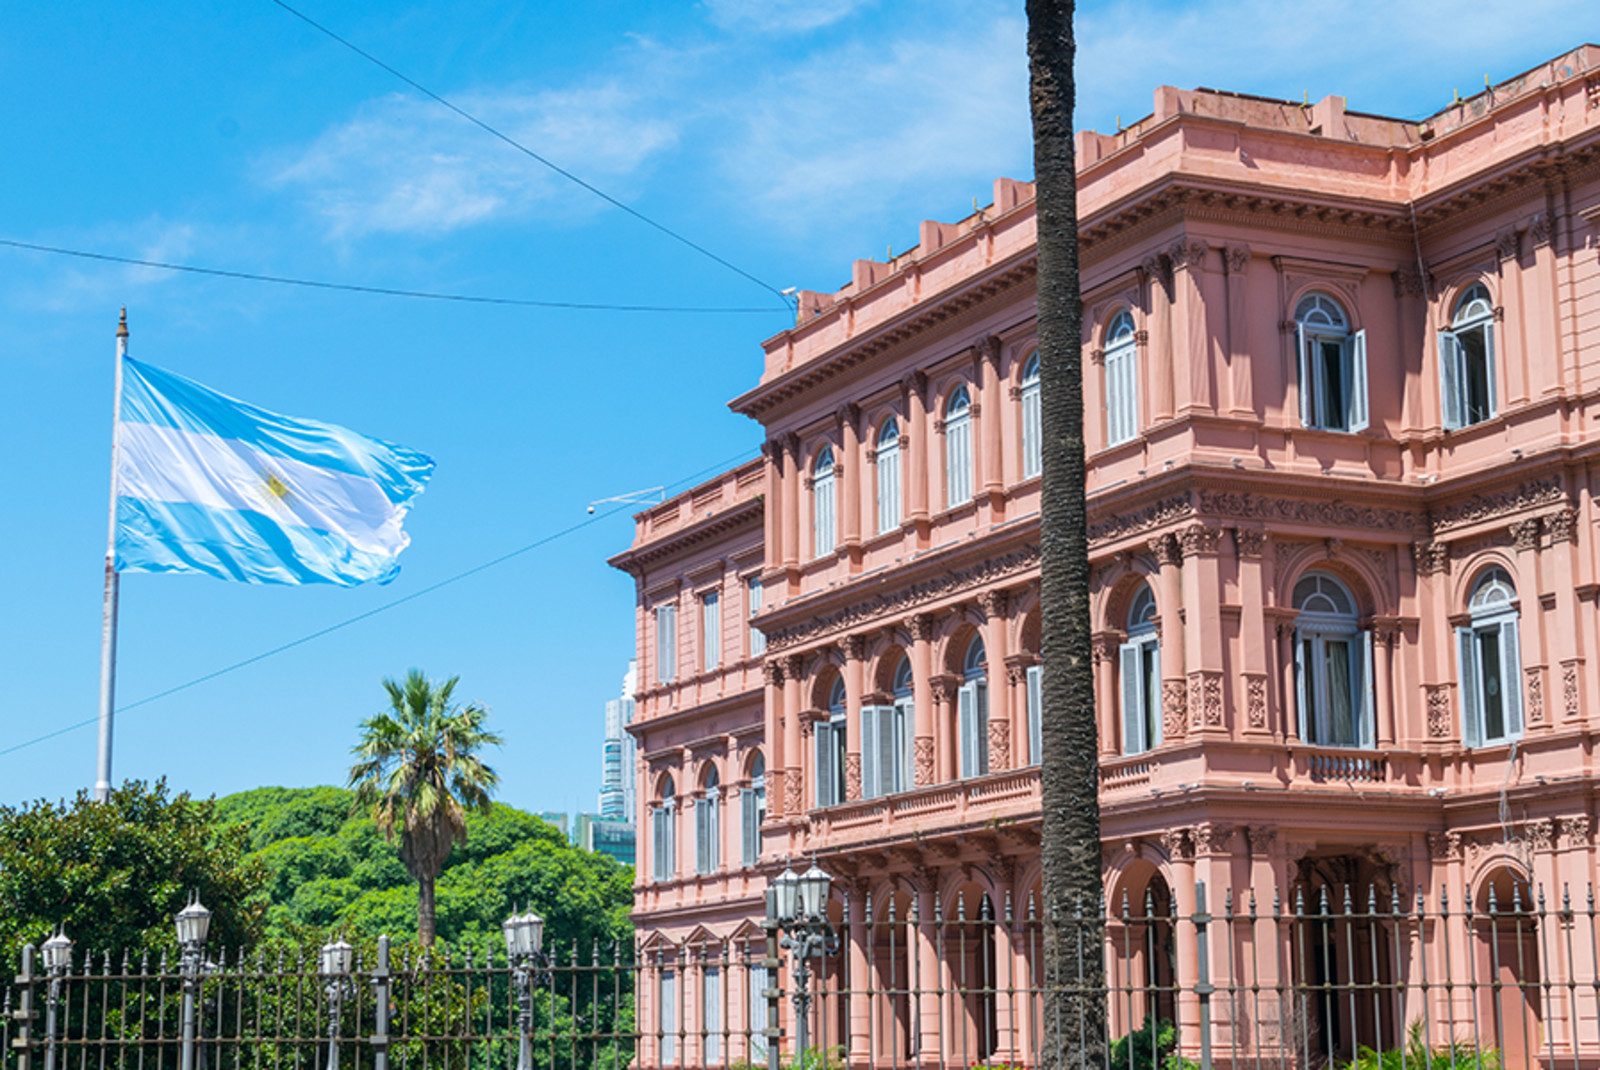 An Adventurer’s 8-Day Guide to Argentina - Day 1: Arrive in Buenos Aires